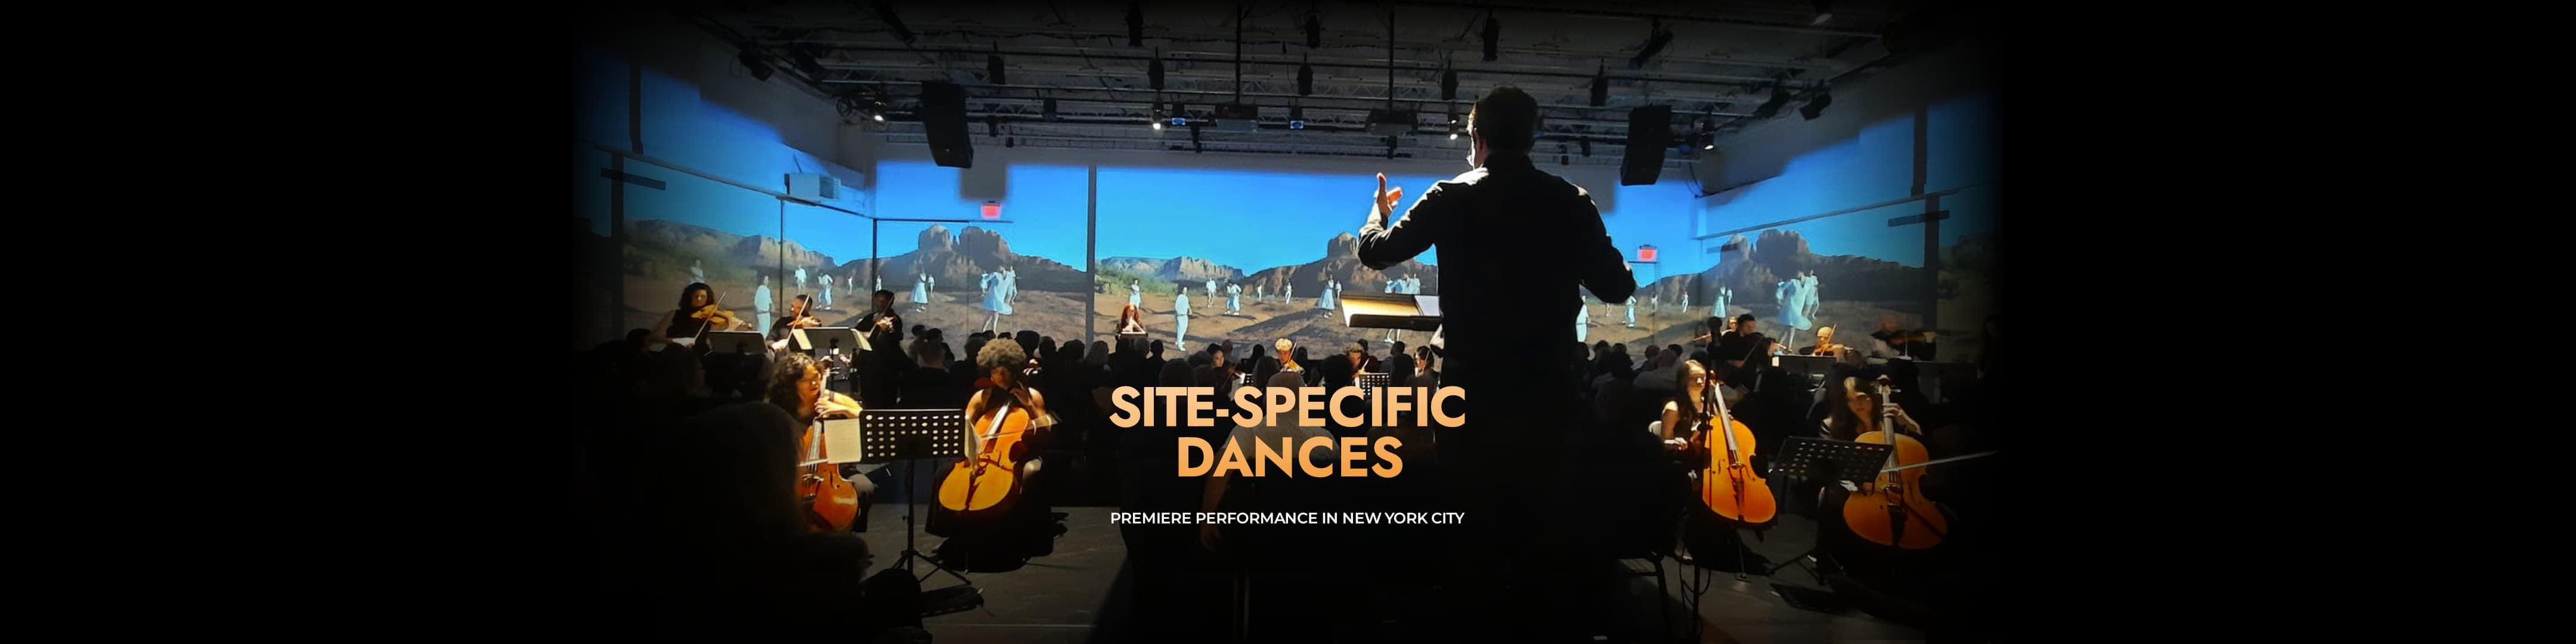 Site-Specific Dances – Premiere performance in New York City presents a stunning vision of the future of collaborative arts